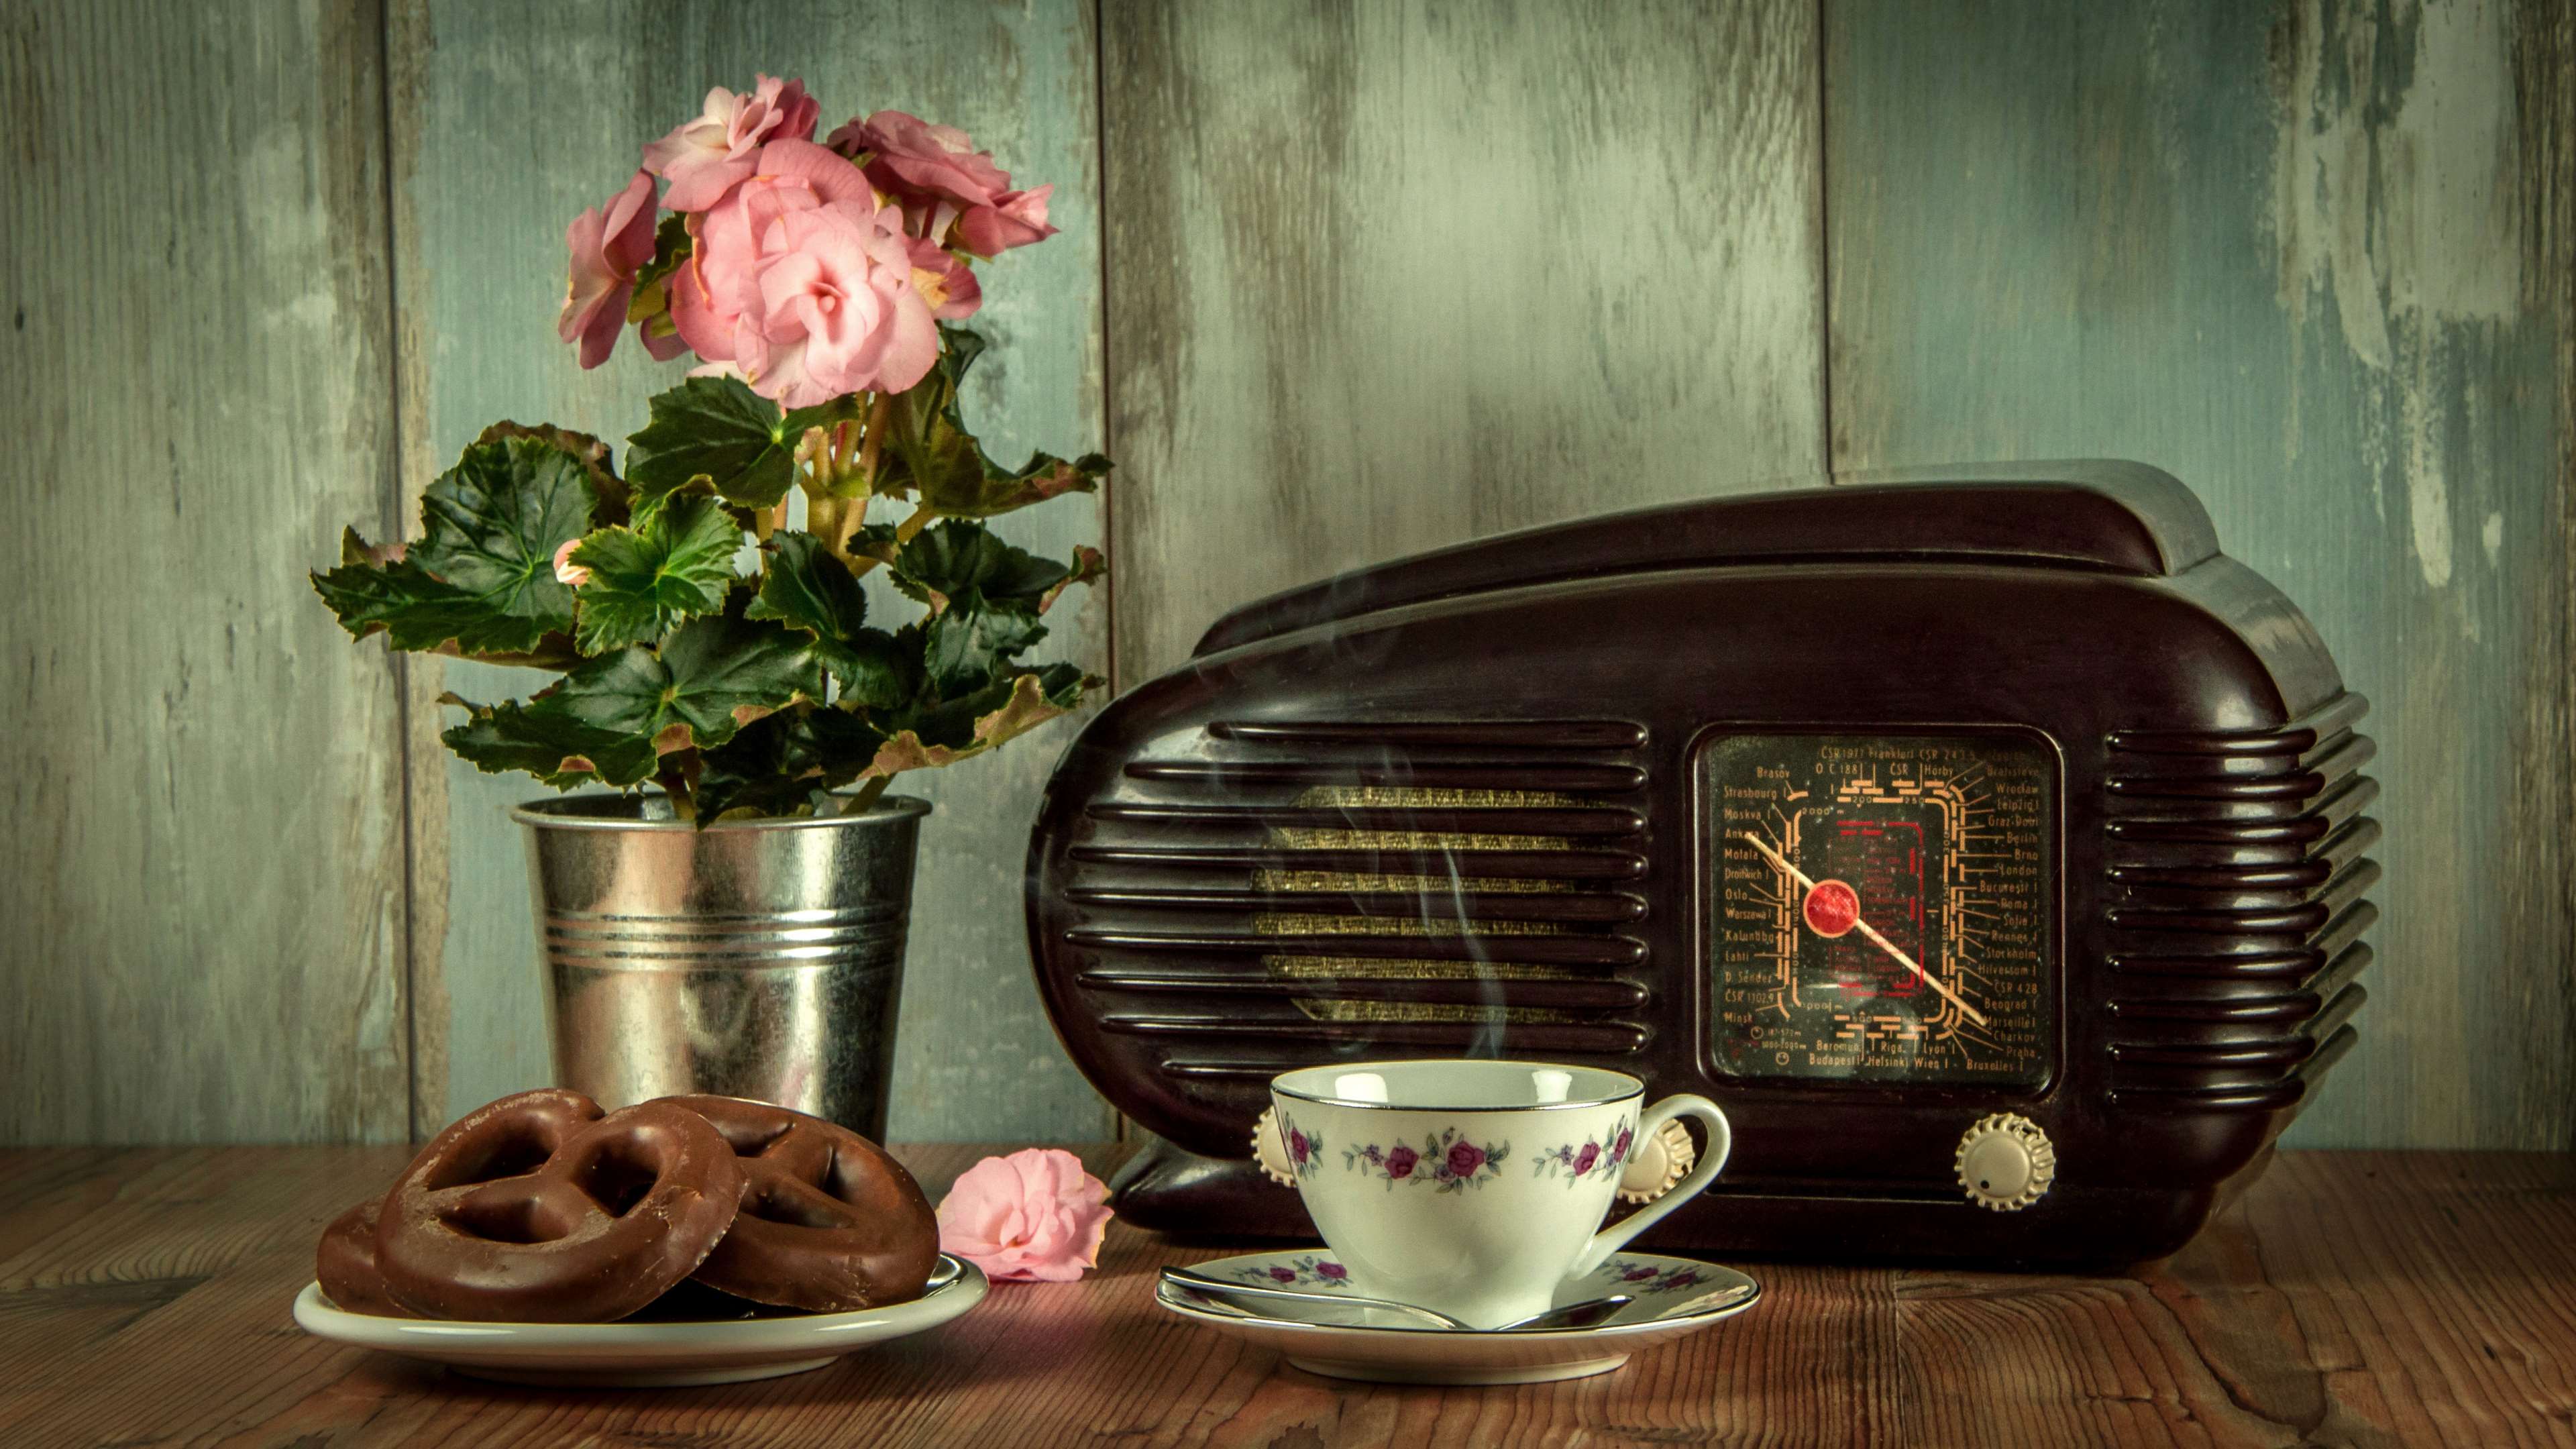 3840x2160 a cup of, an antique, coffee, cup, history, hot, museum, old, radio, refresh, refreshment, retro, still life, vintage 4k wallpaper JPG 614 kB